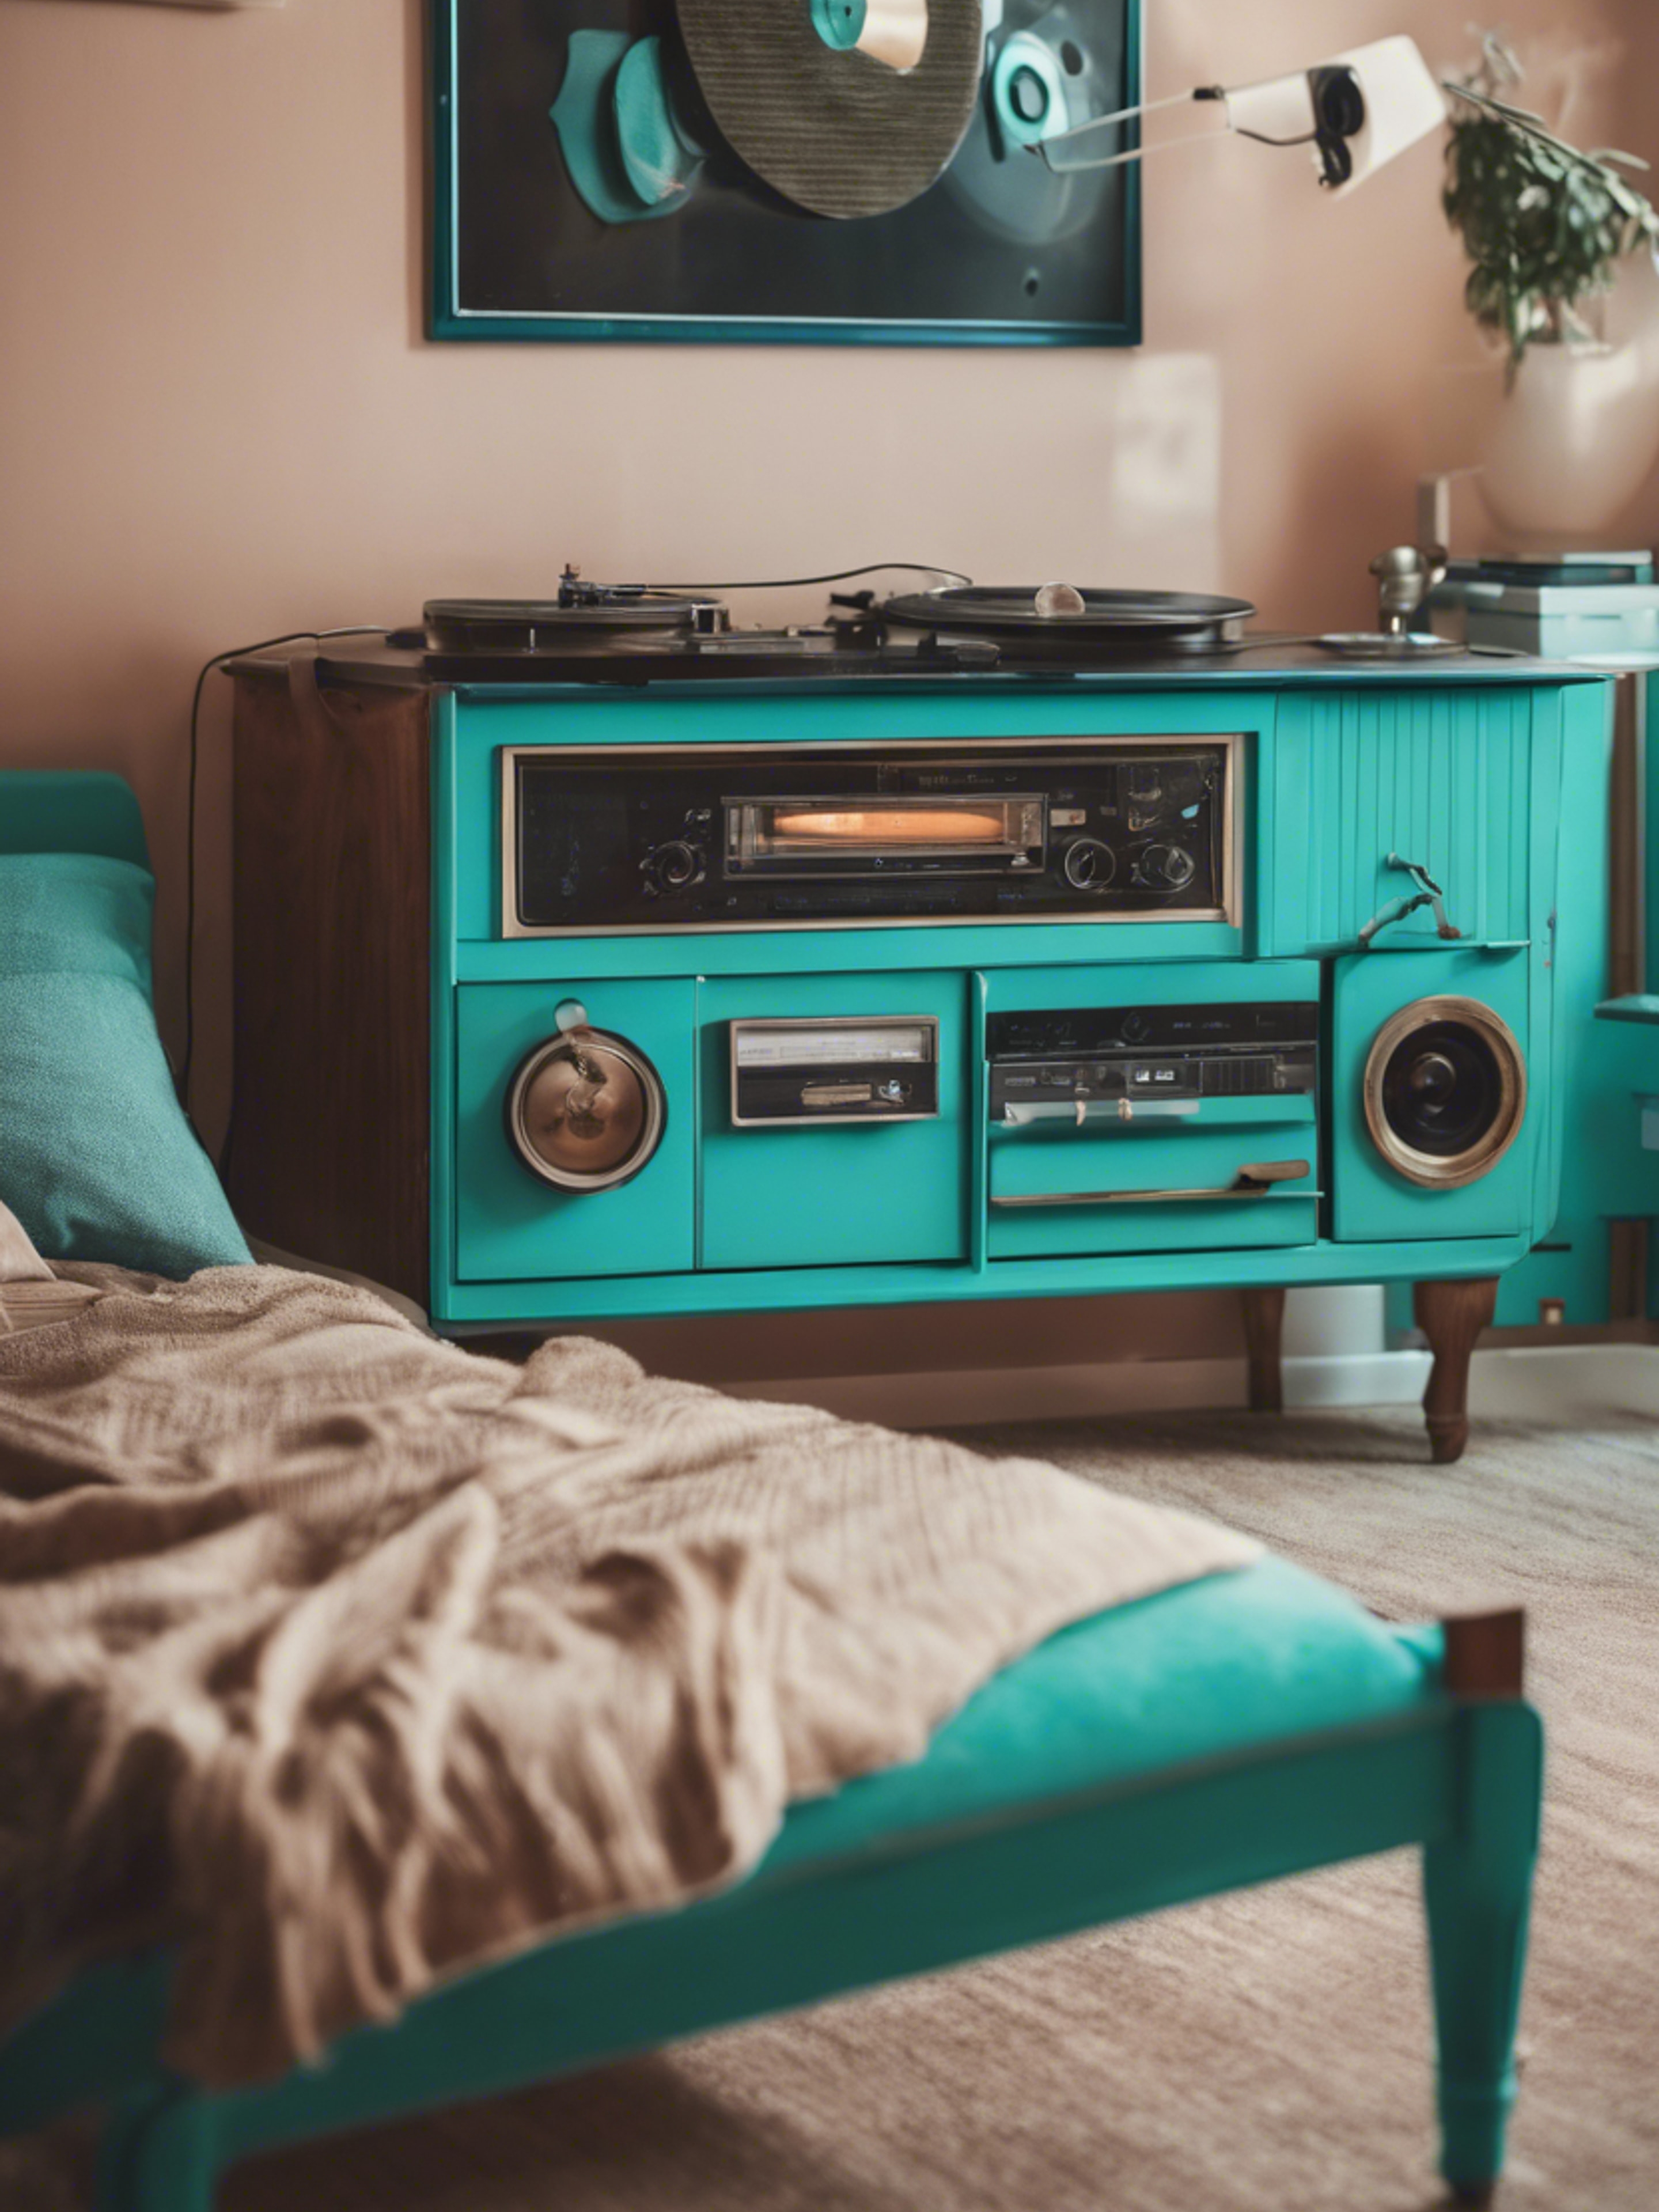 A turquoise retro bedroom with vintage furniture and record players Kertas dinding[9d05420ae9754c17b49a]